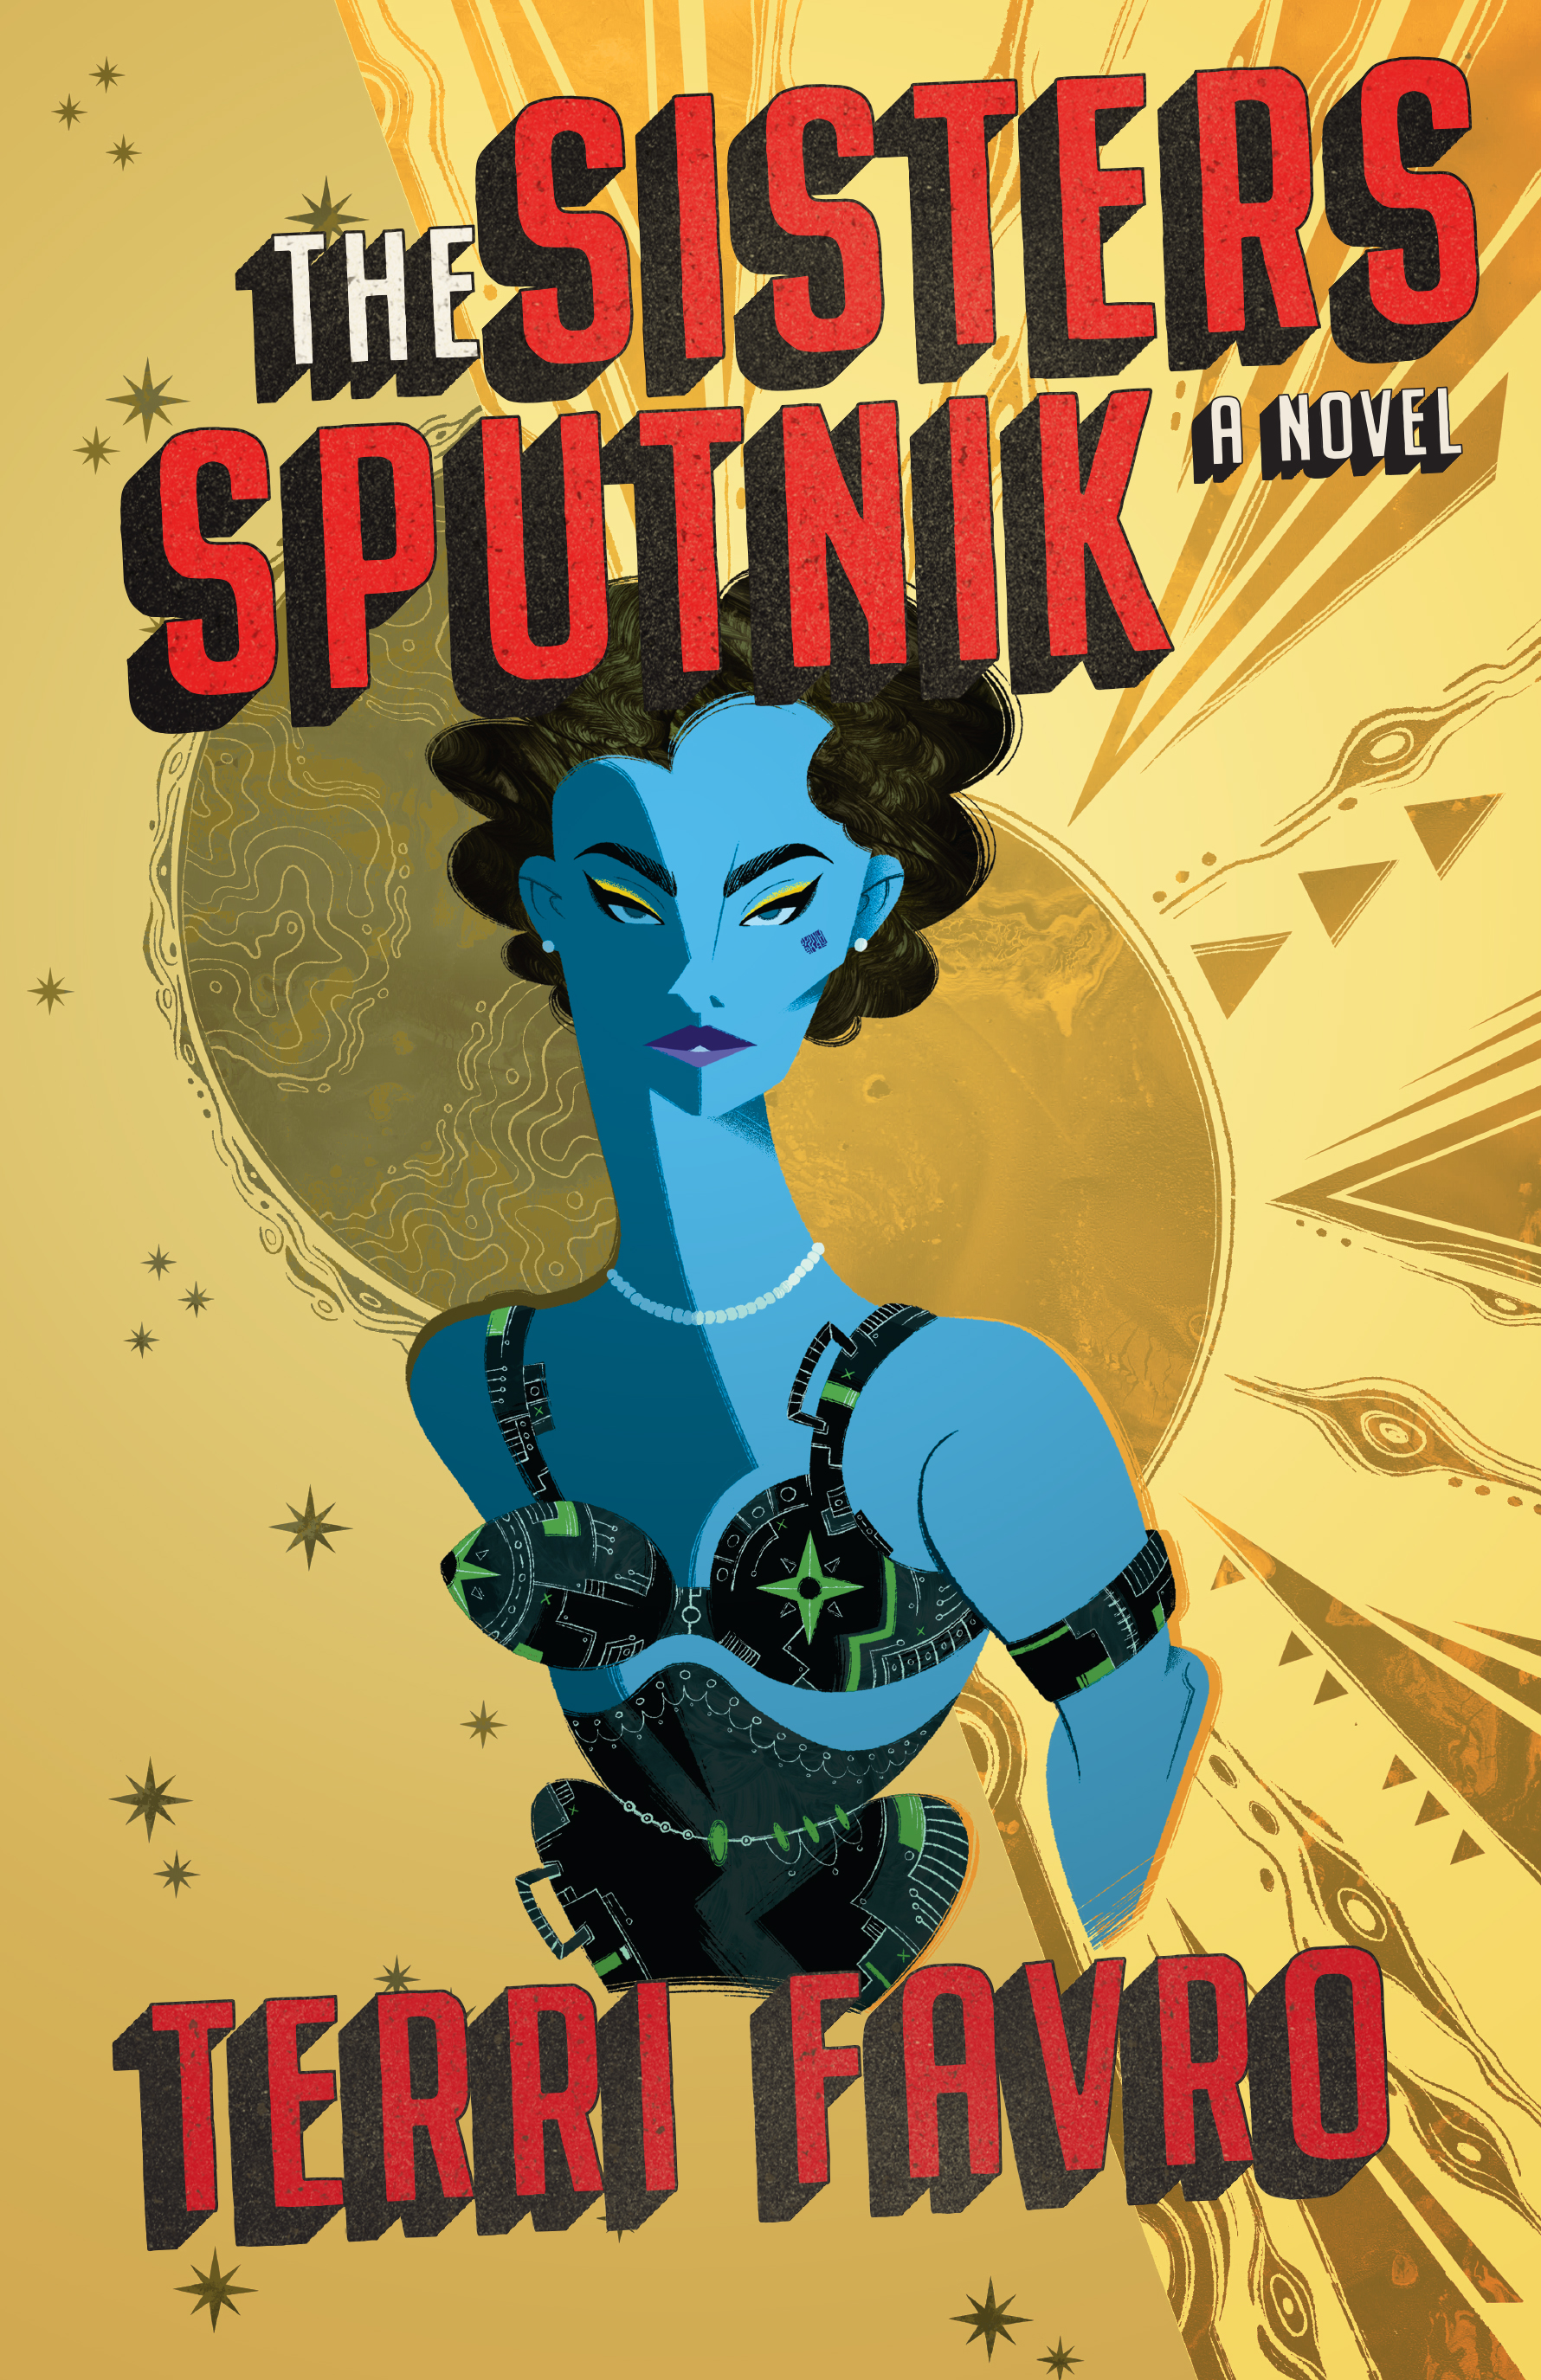 Cover of "The Sisters Sputnik", a novel by Terri Favro. Cover illustration is a blue-skinned female superhero in a black bustier against a yellow sunburst in the background. 